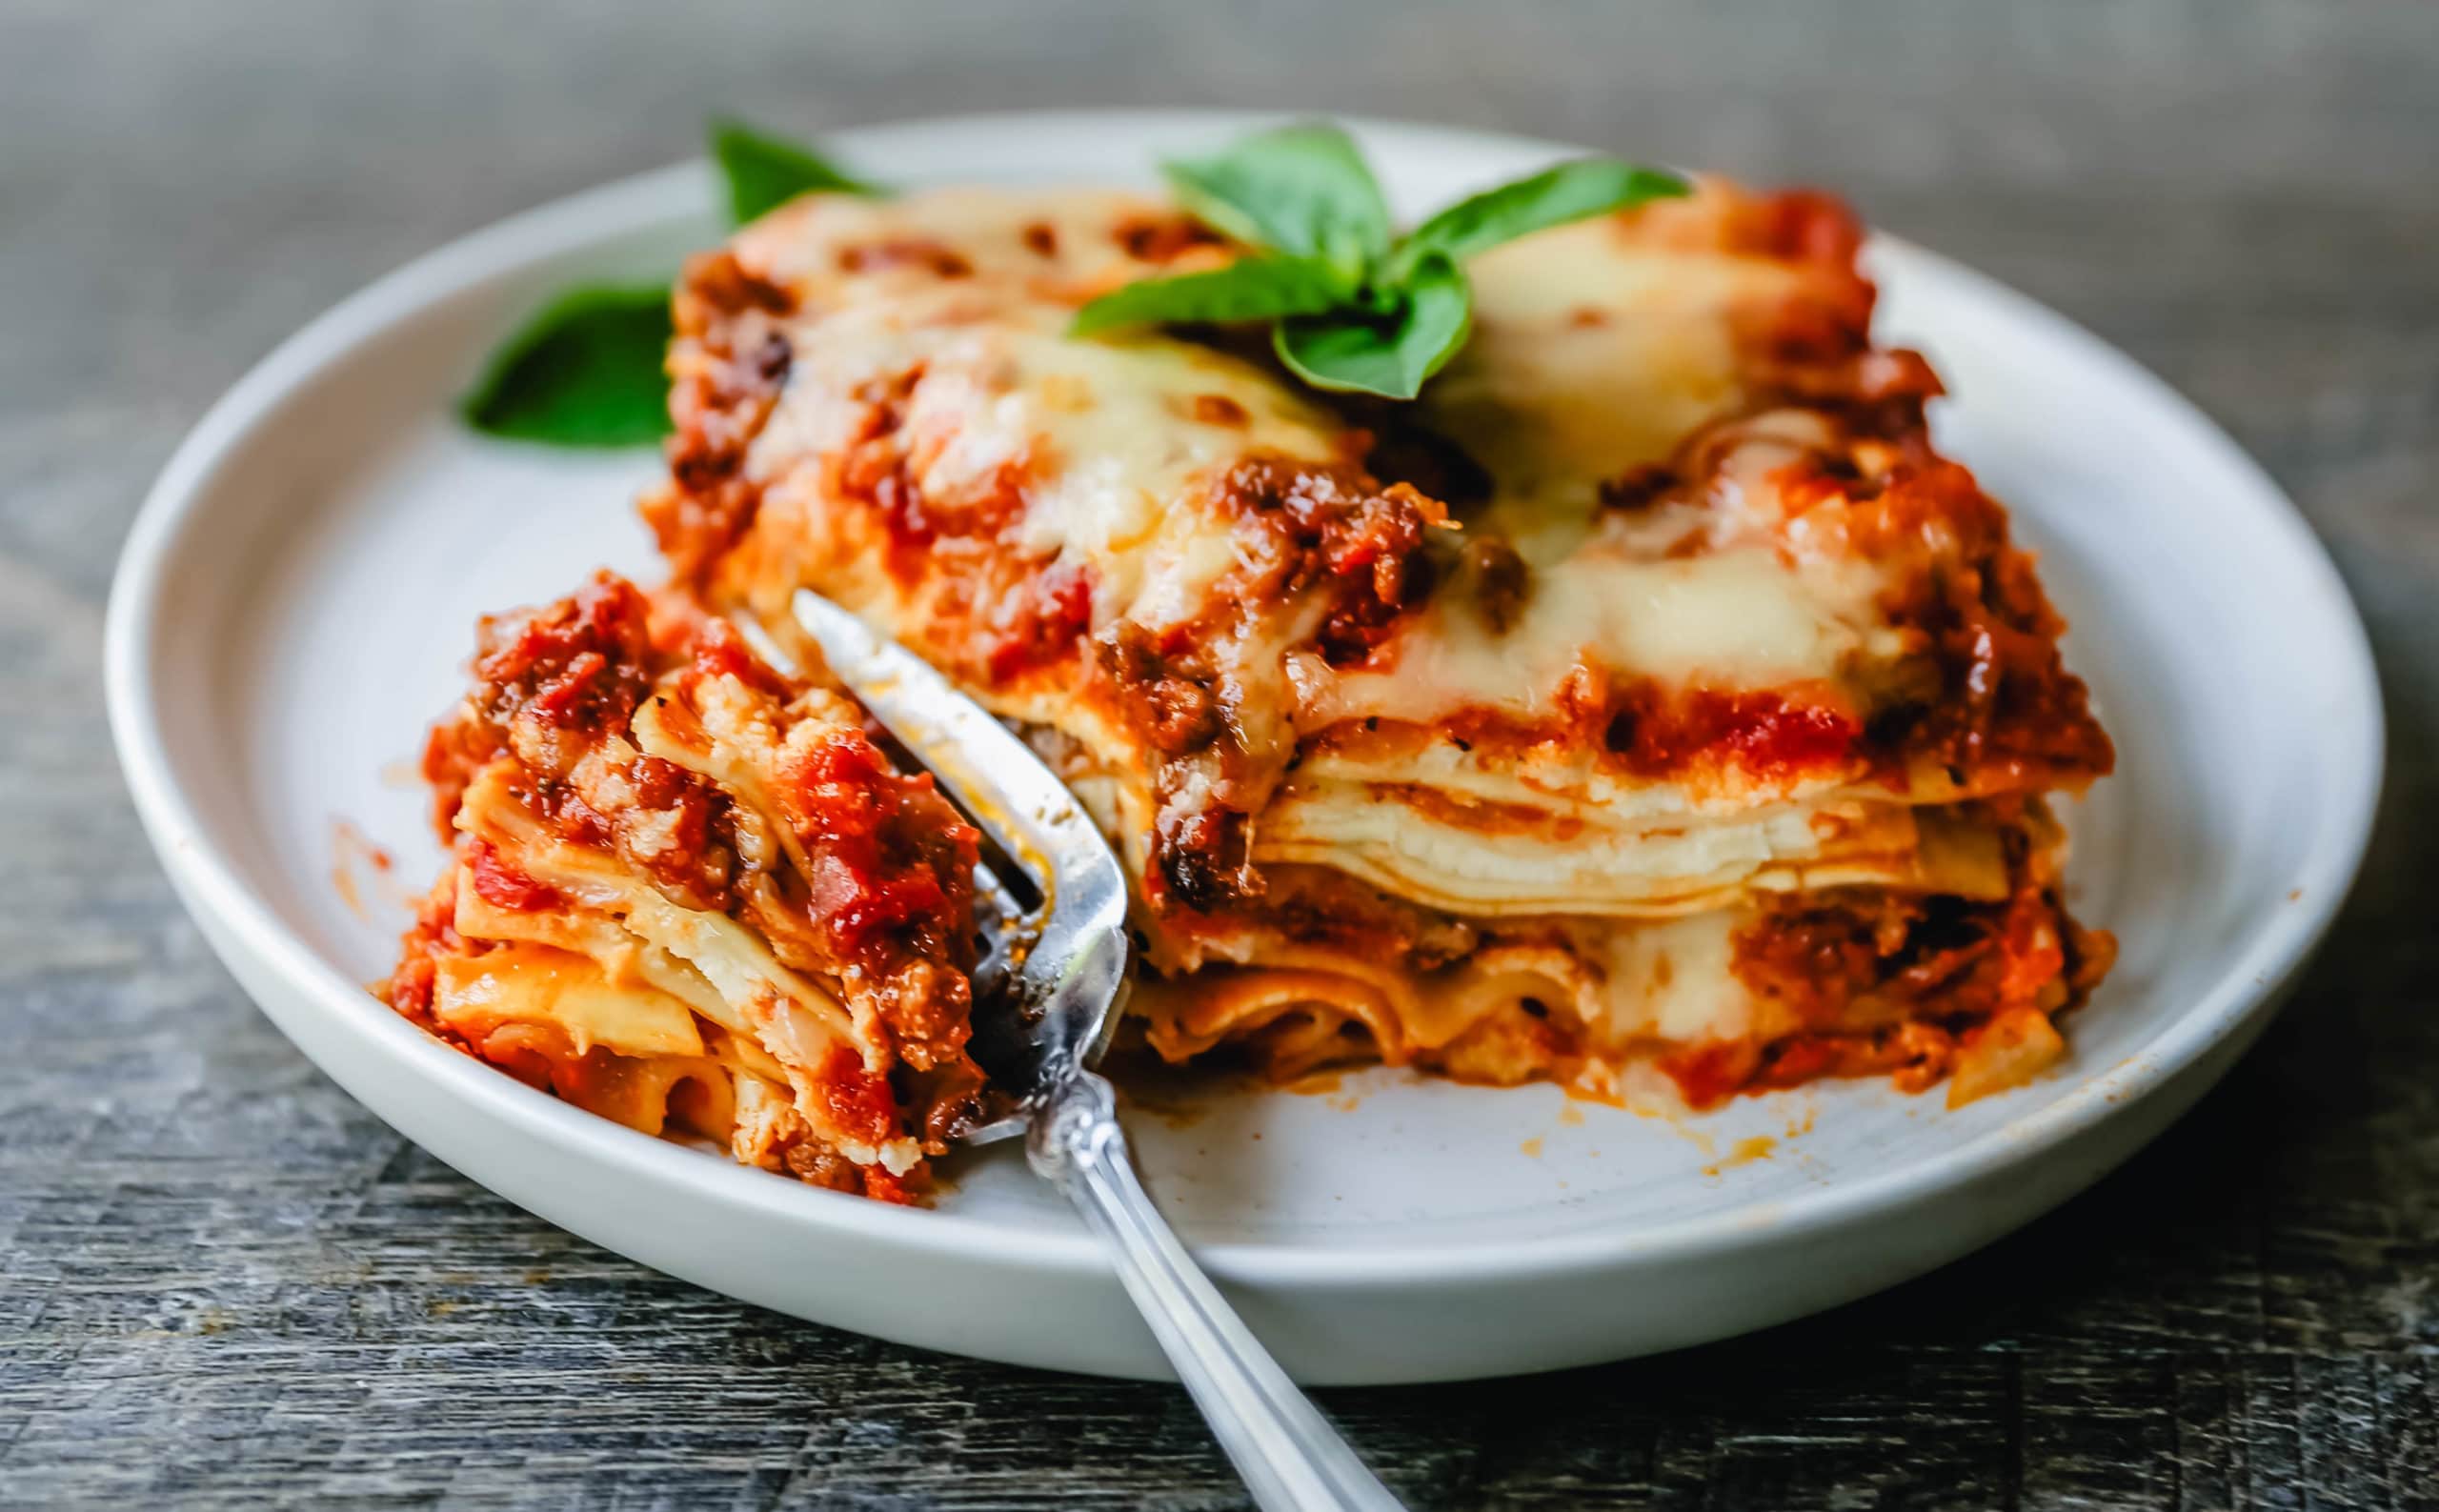 The Best Classic Lasagna Recipe The perfect lasagna recipe made with parmesan ricotta cheese filling, melted mozzarella cheese, lasagna noodles, and a robust tomato meat sauce. It is the best lasagna recipe!